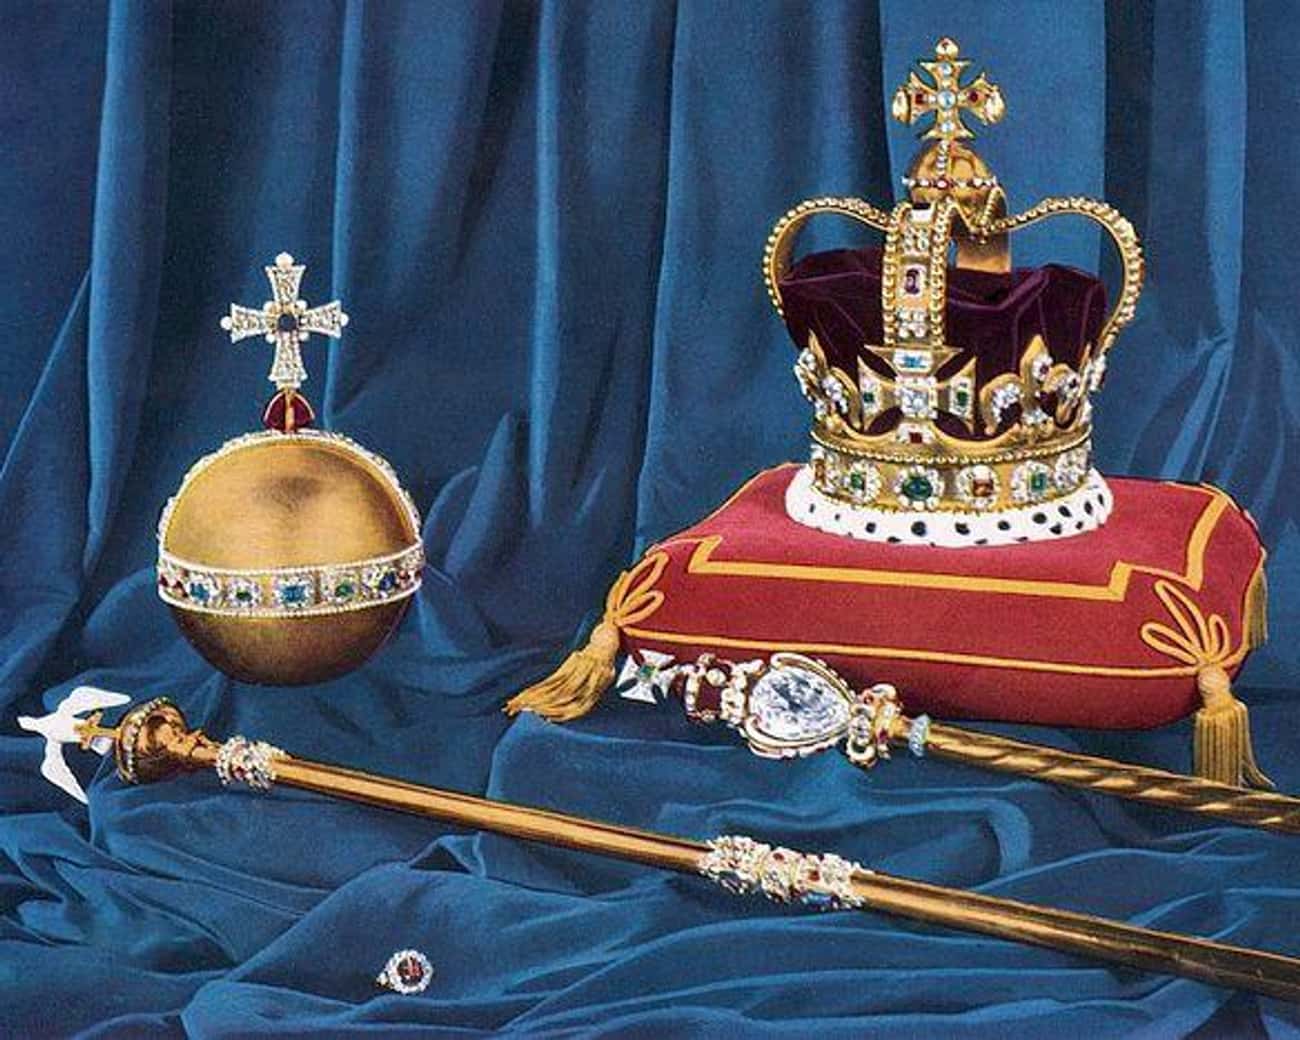 Coronation Regalia Includes More Than Just A Crown And Scepter